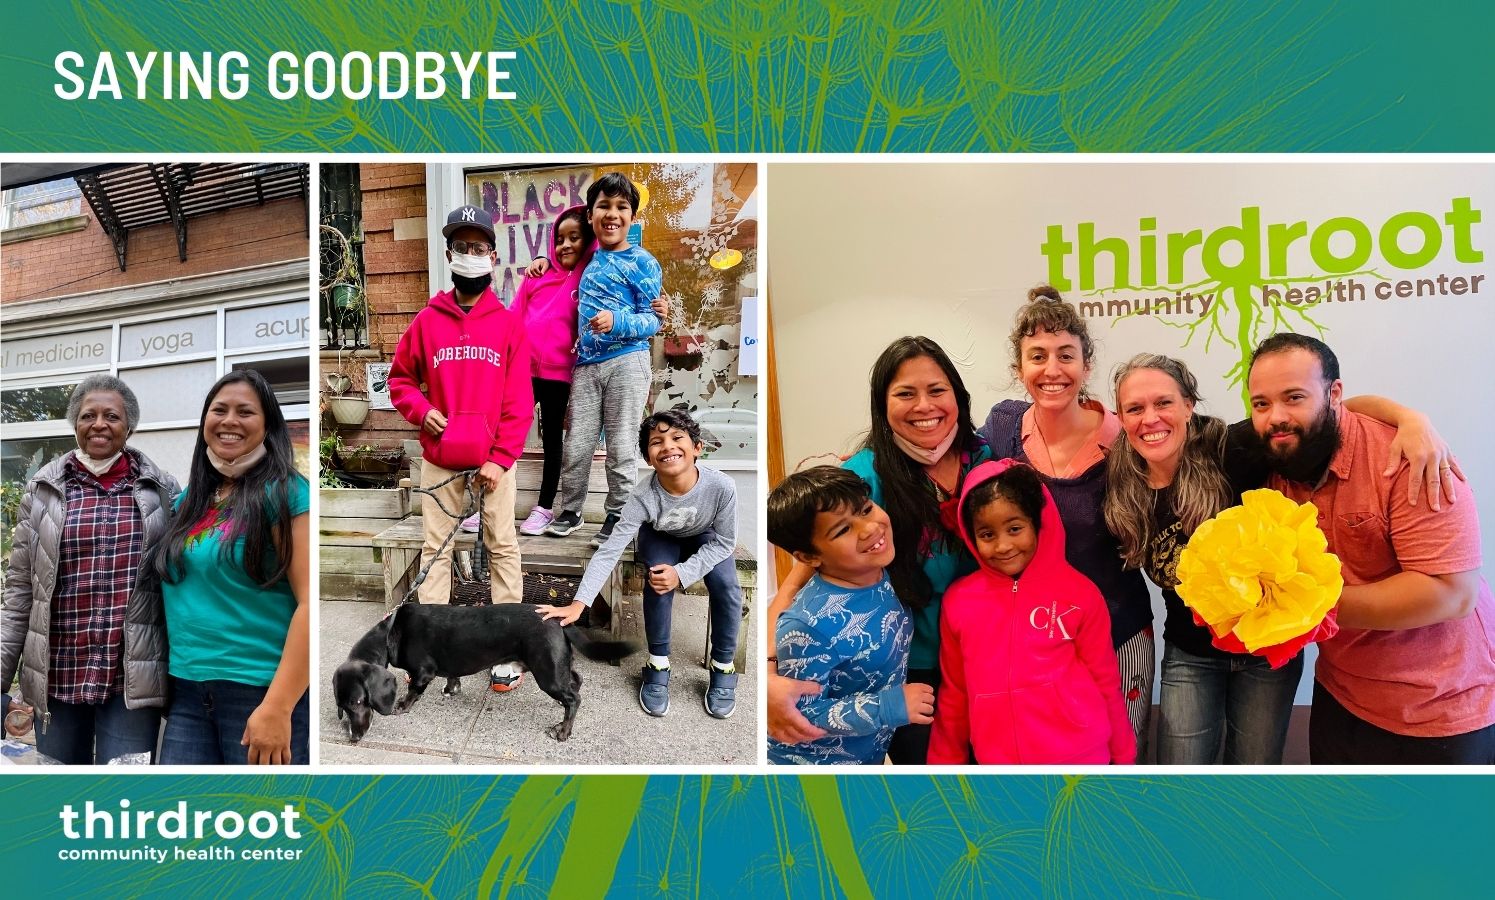 The text "Saying Goodbye" appears over three photos showing Third Root staff and their family and community members, posing for the camera. One photo features a dog. Third Root's logo is on the bottom left.